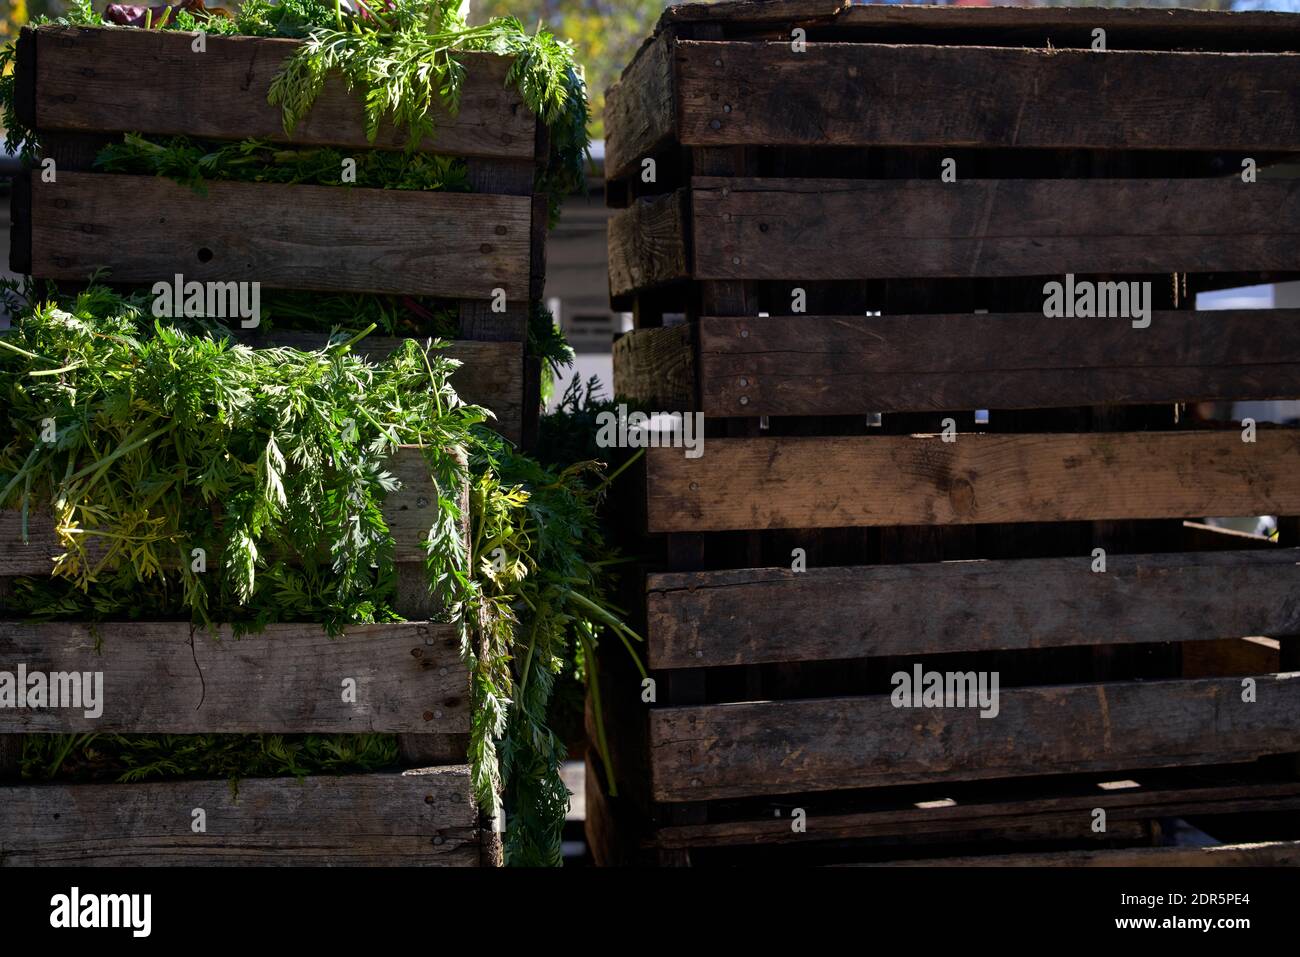 Carrot greens stored in wooden crates. Stock Photo